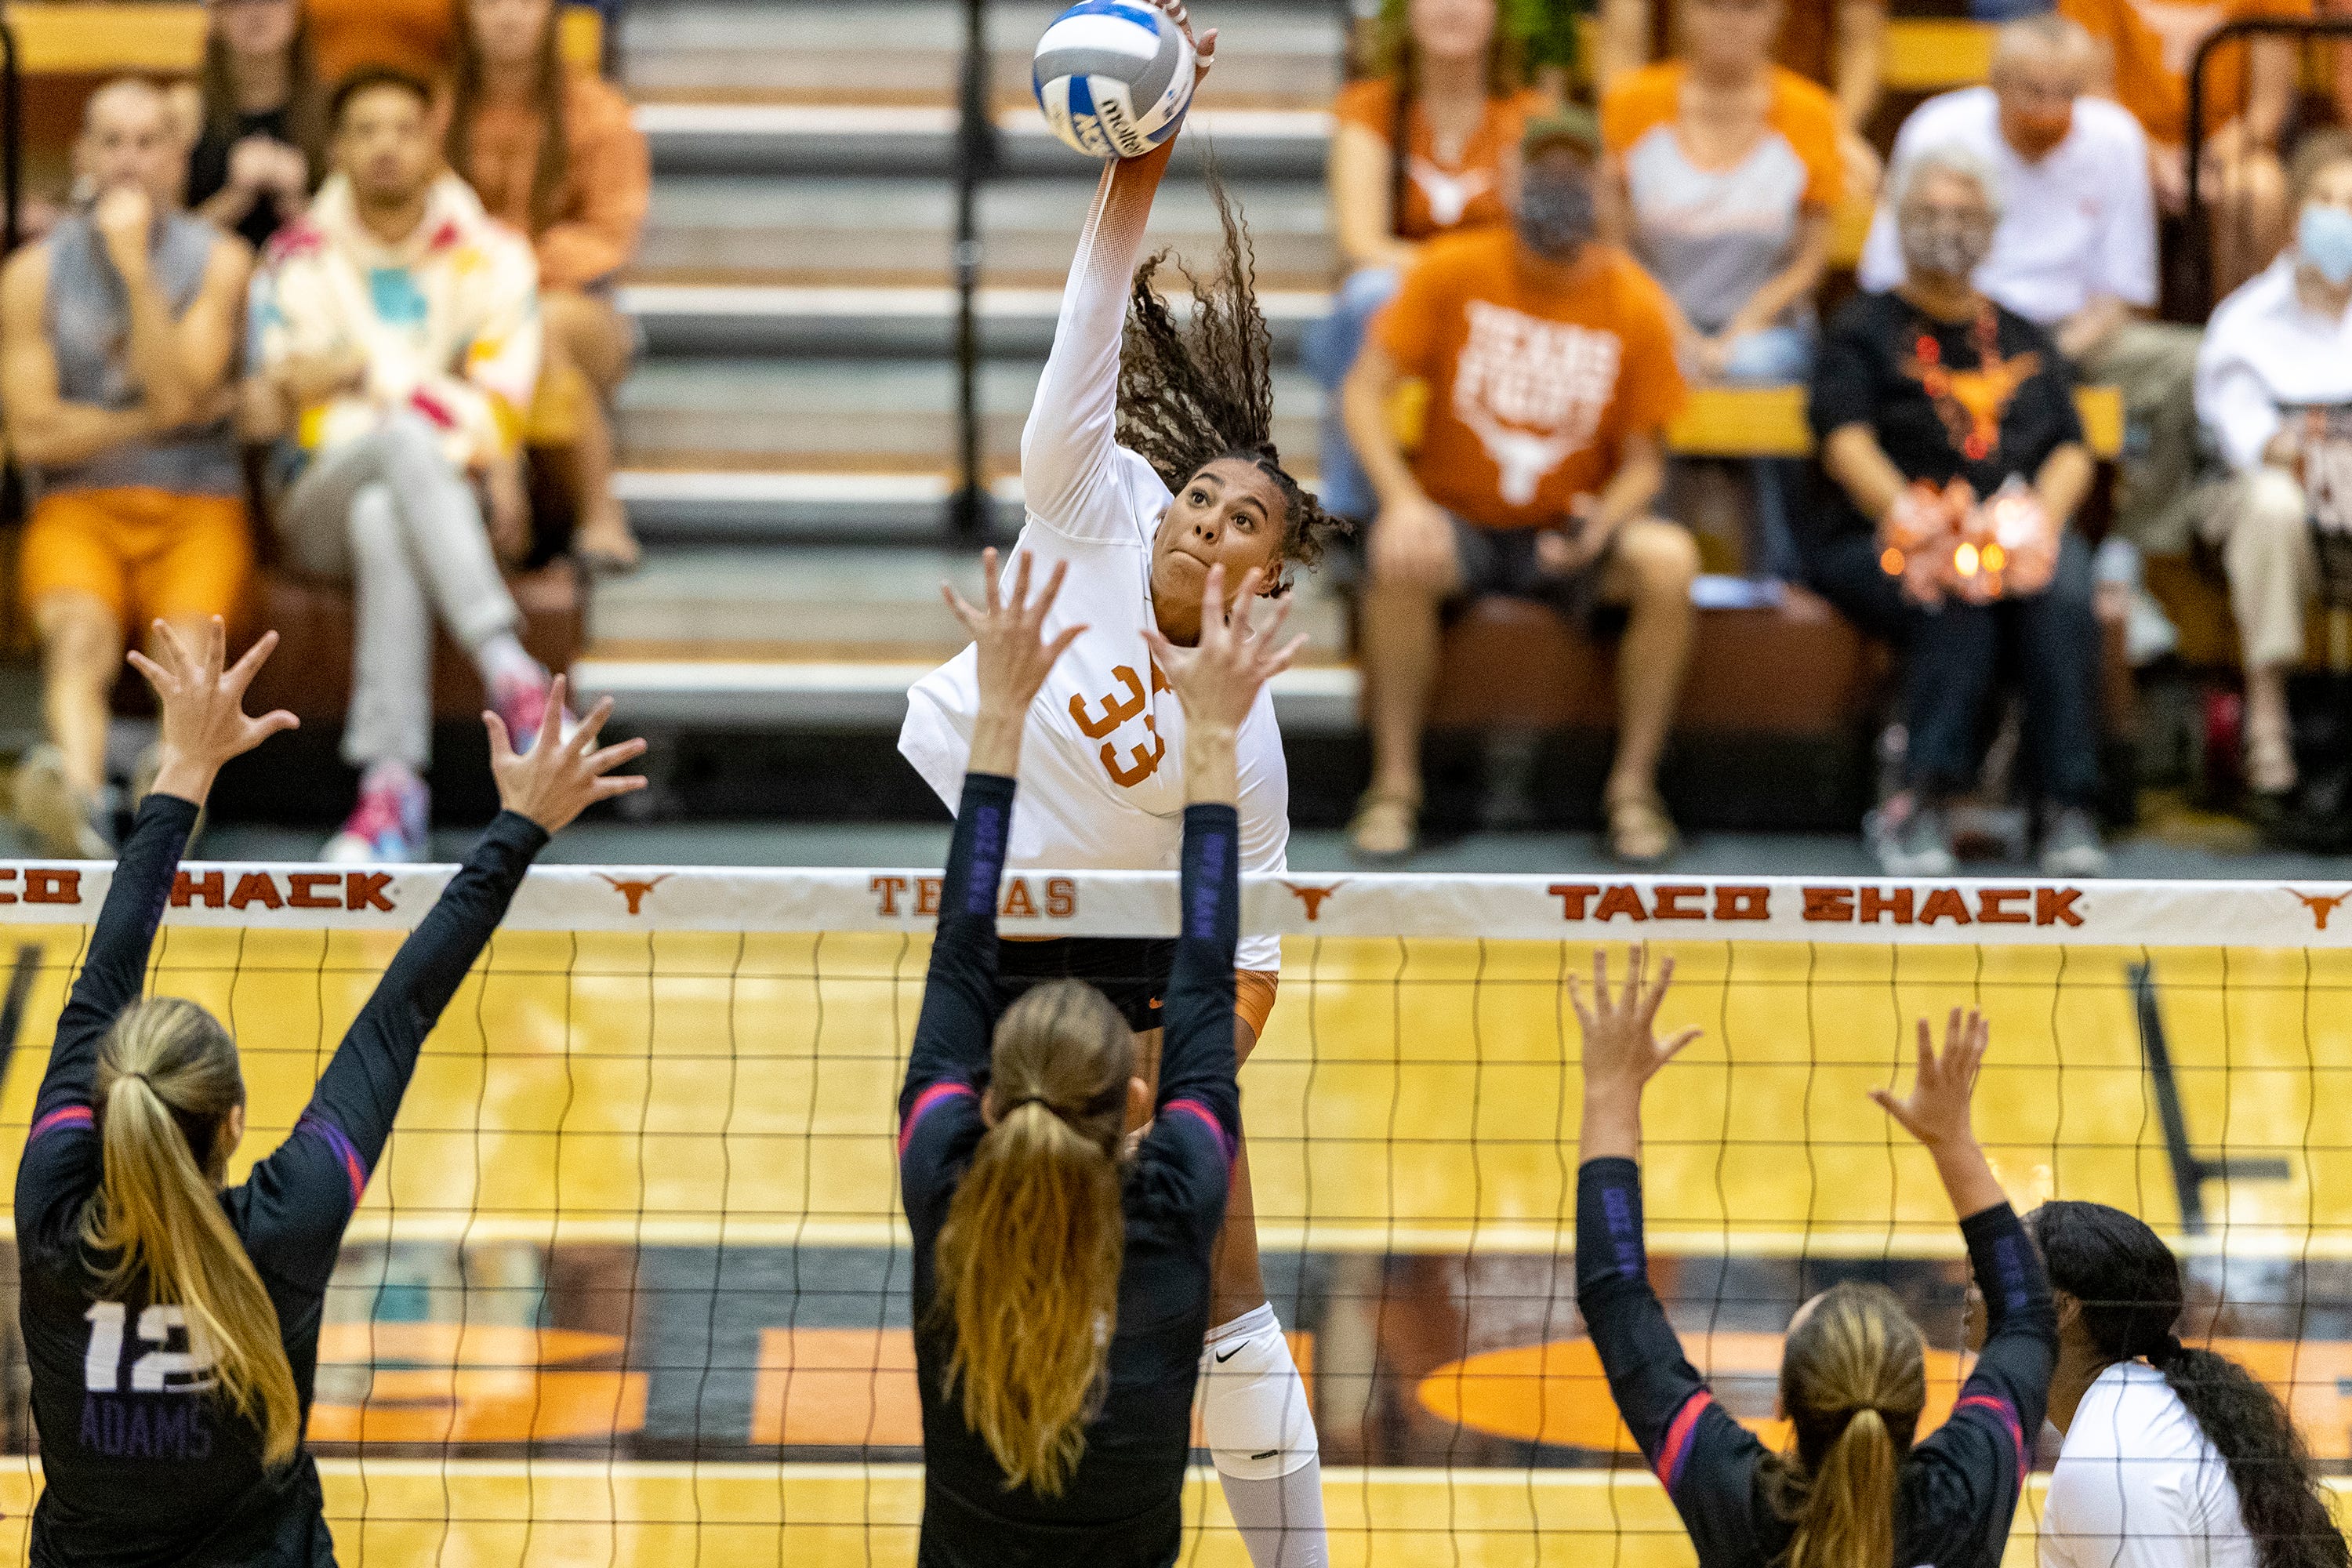 Texas volleyball schedule at NCAA tournament Bracket, TV + streaming